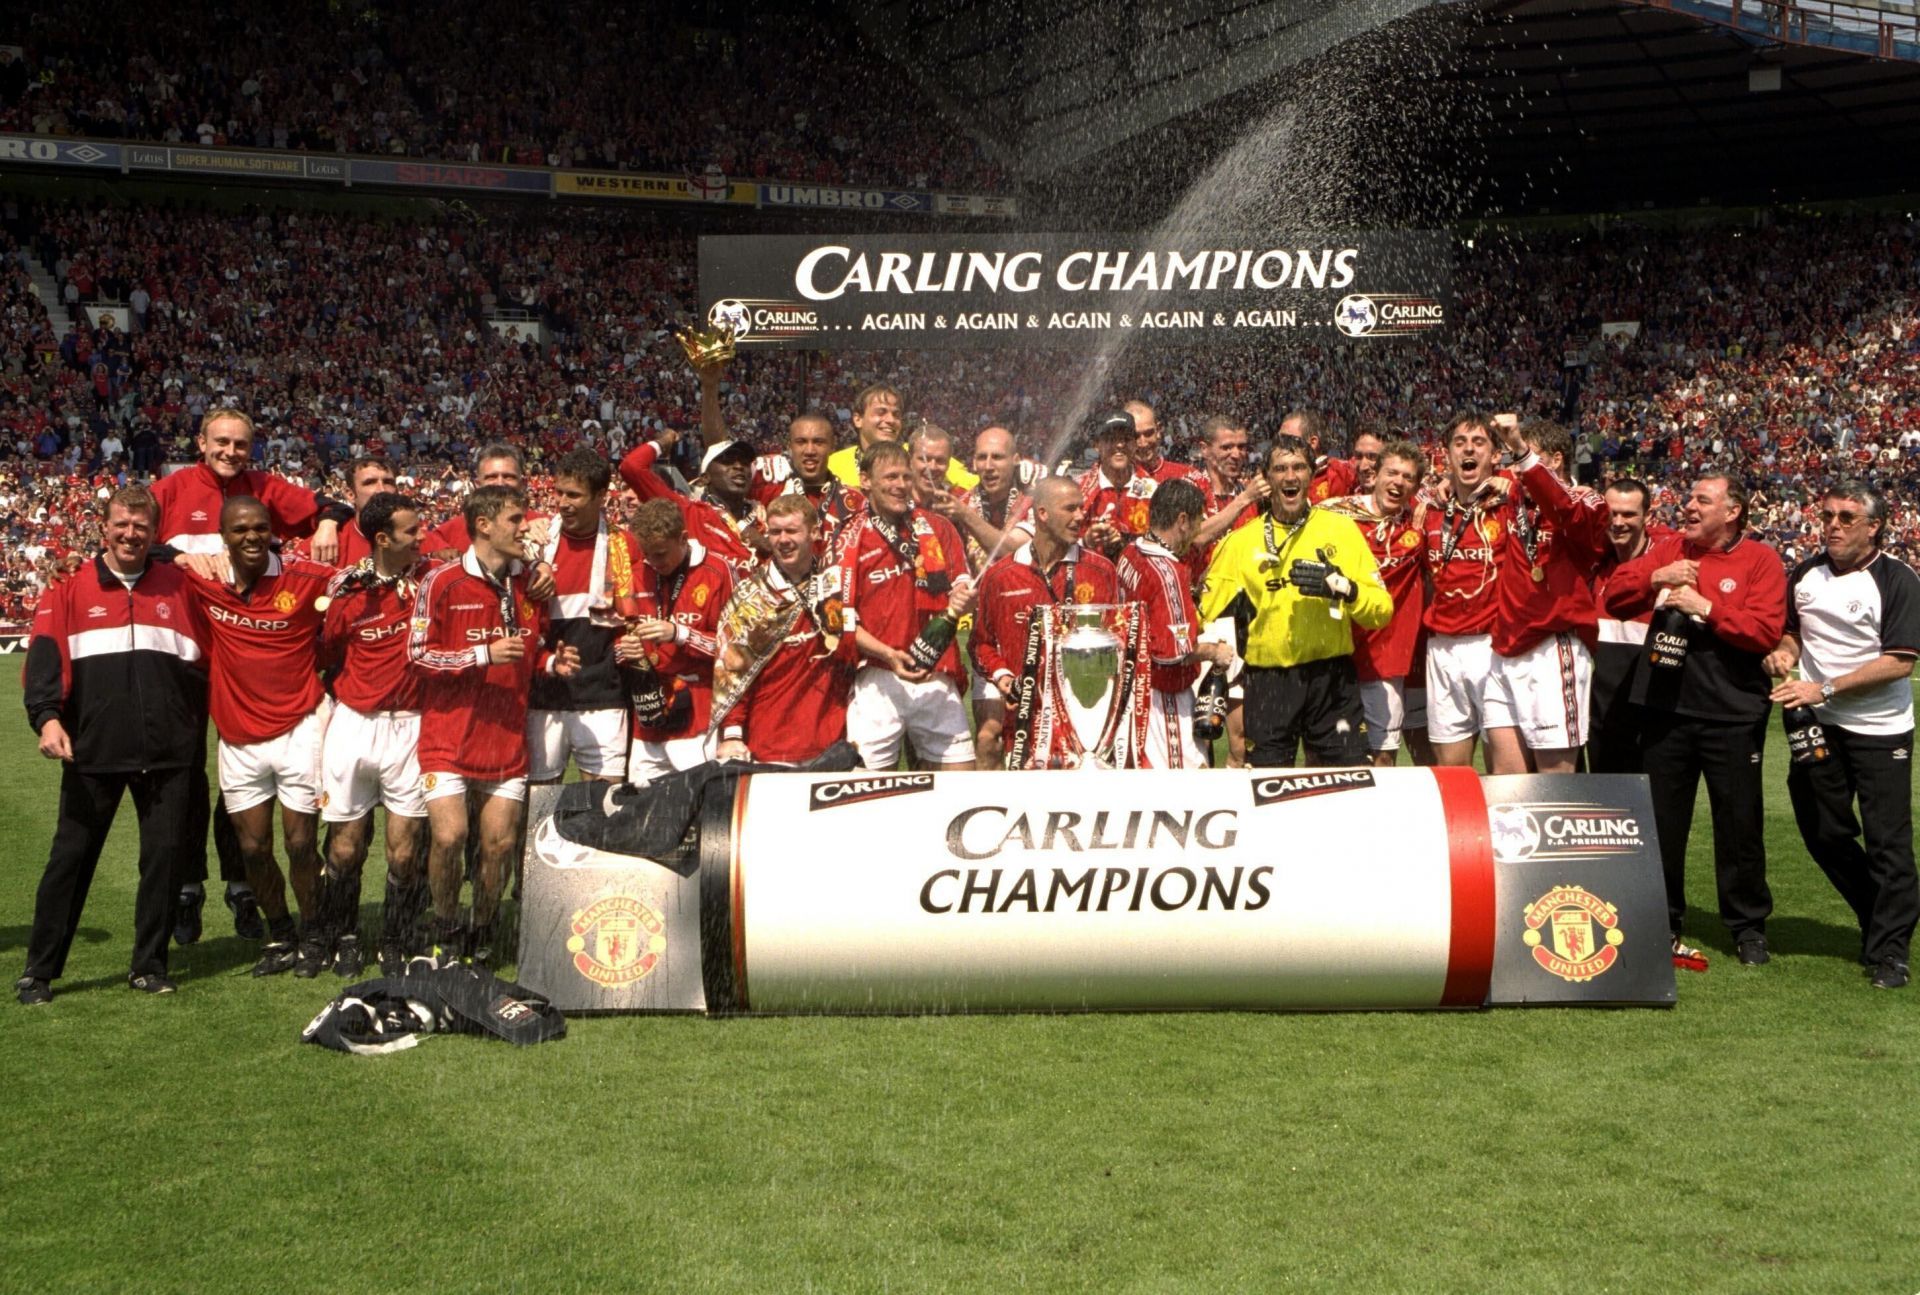 Manchester United celebrating their 1999-00 title win (Image courtesy: premierleague.com)